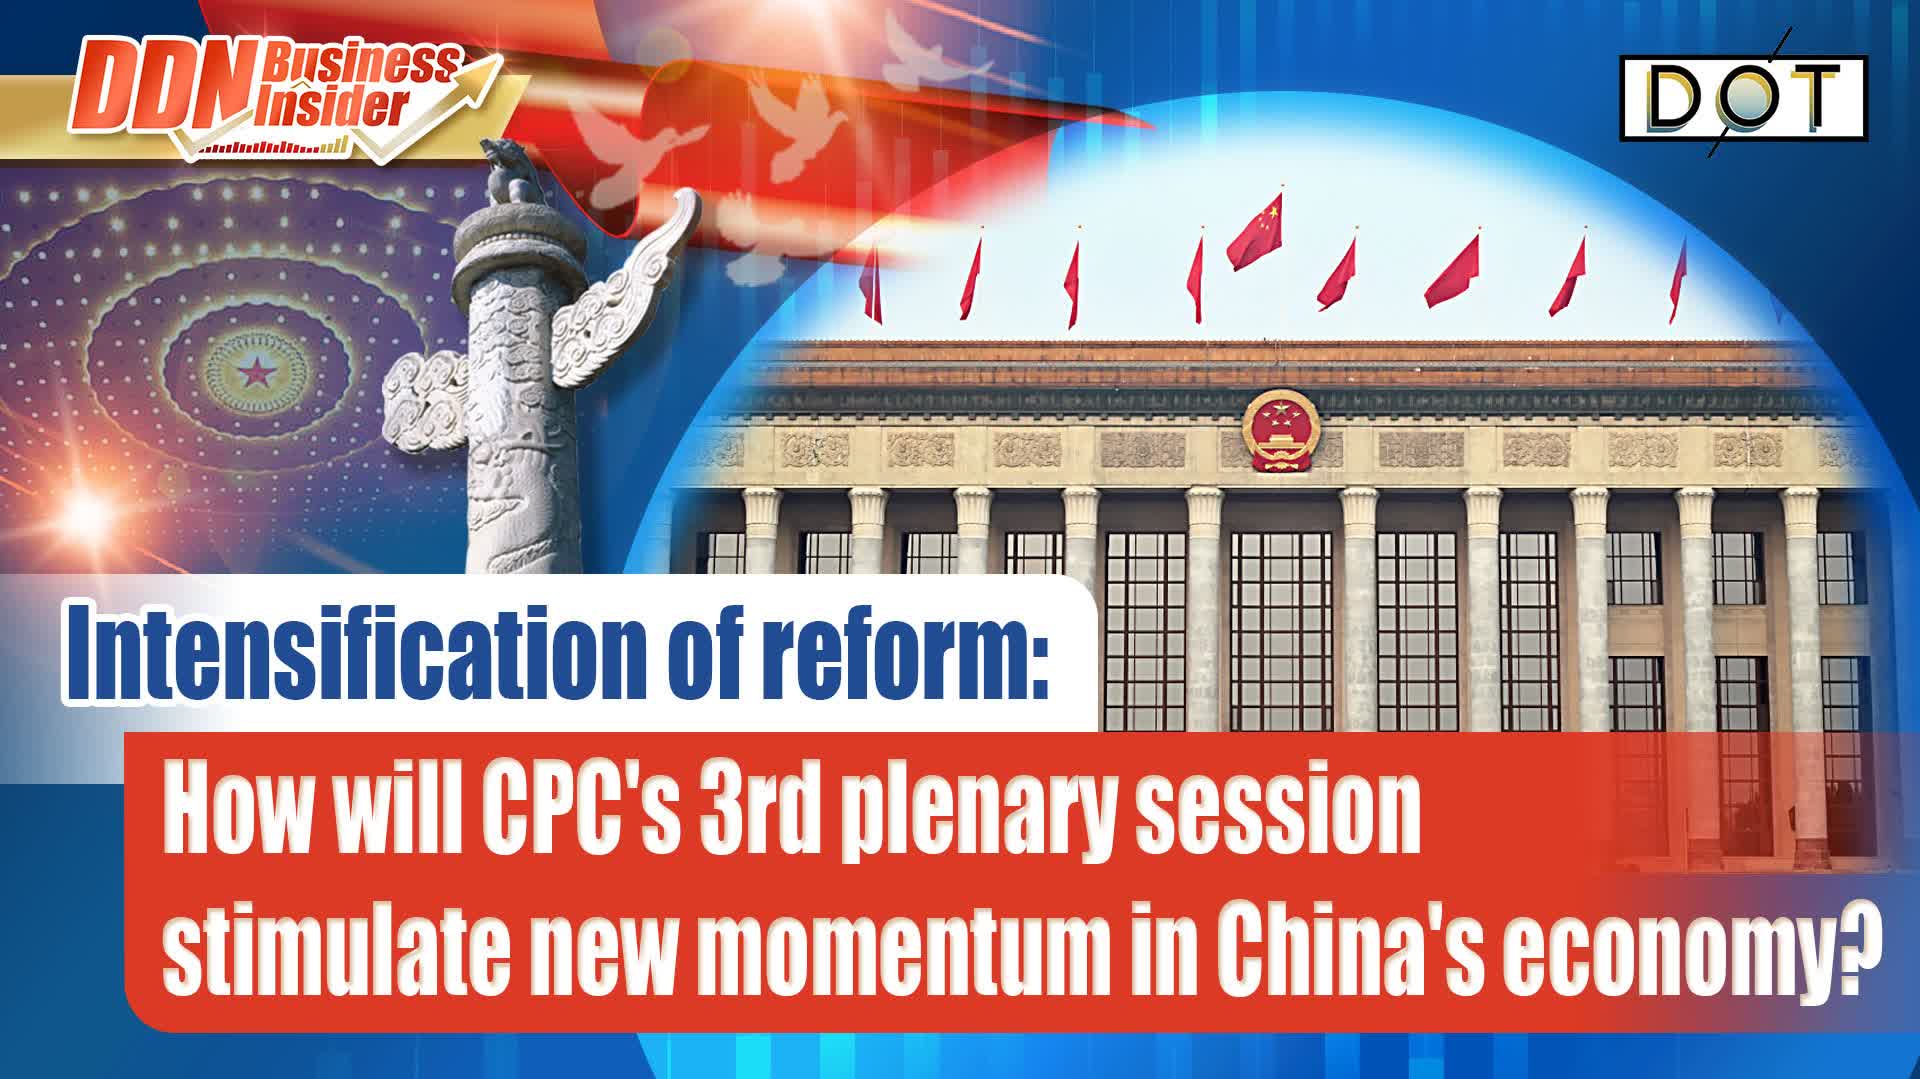 DDN Business Insider | Intensification of reform: How will CPC's 3rd plenary session stimulate new momentum in China's economy?